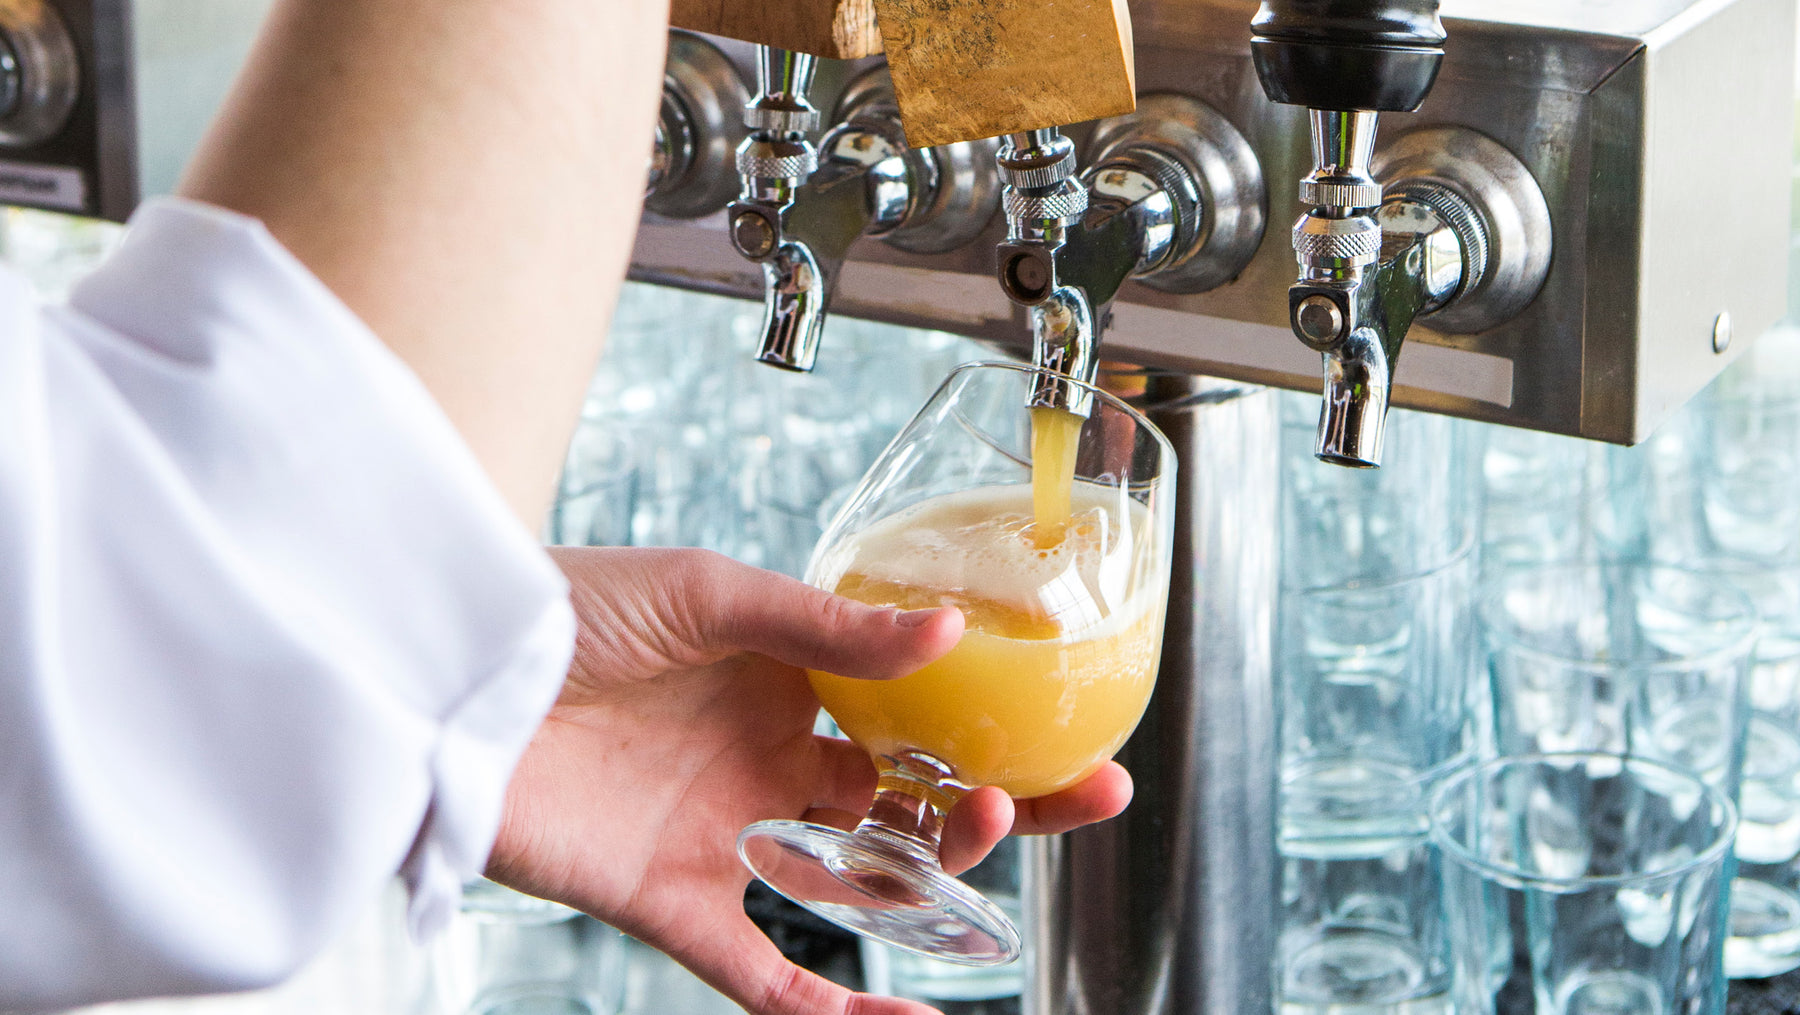 Troubleshooting Common Problems with Your Draft Beer System